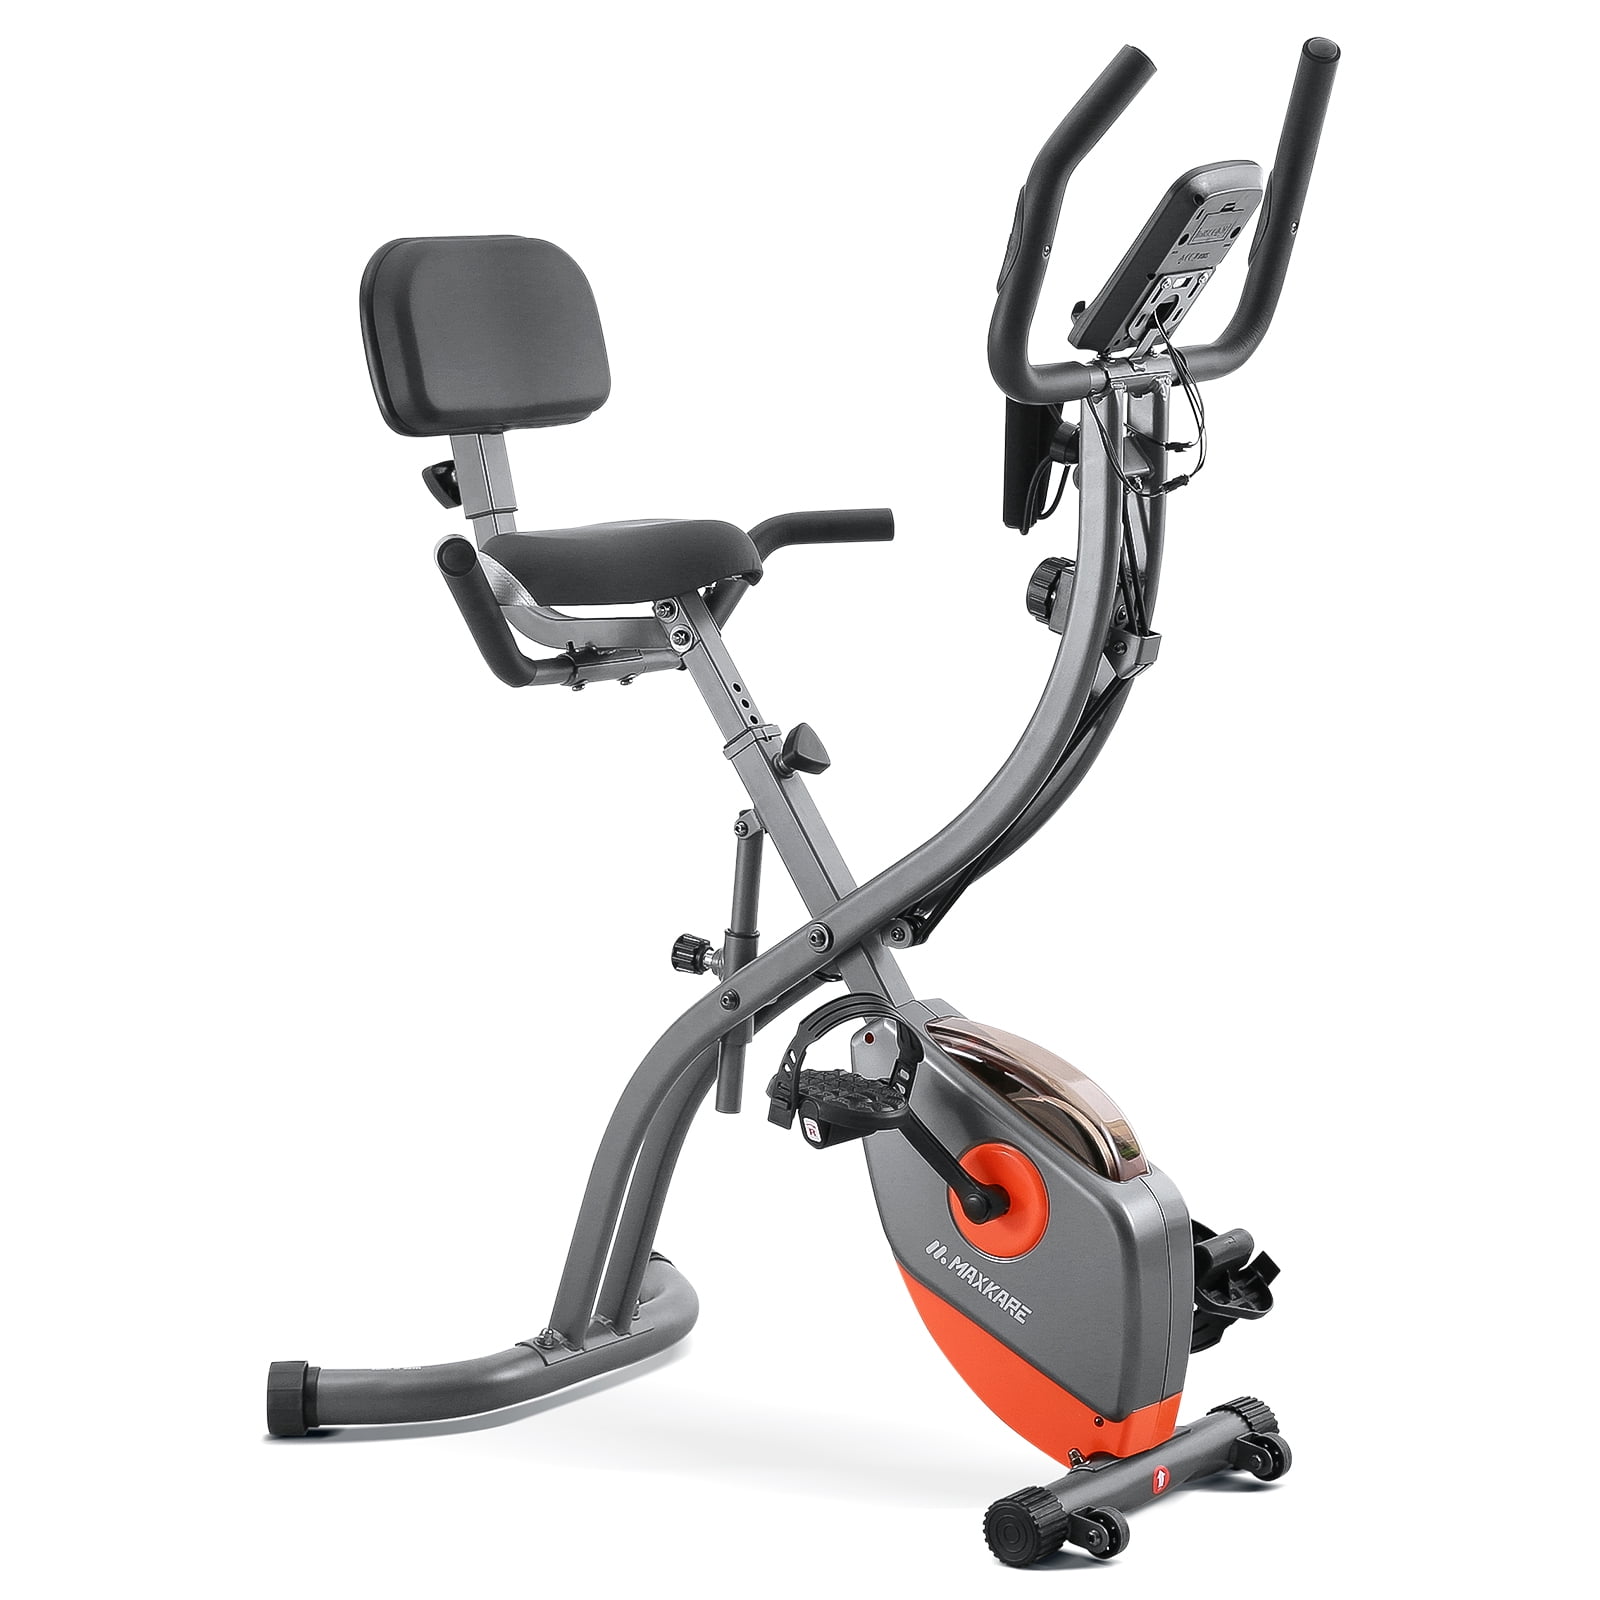 Details about   Exercise Stationary Bike Cycling Home Gym Cardio Workout Indoor Fitness Home LCD 